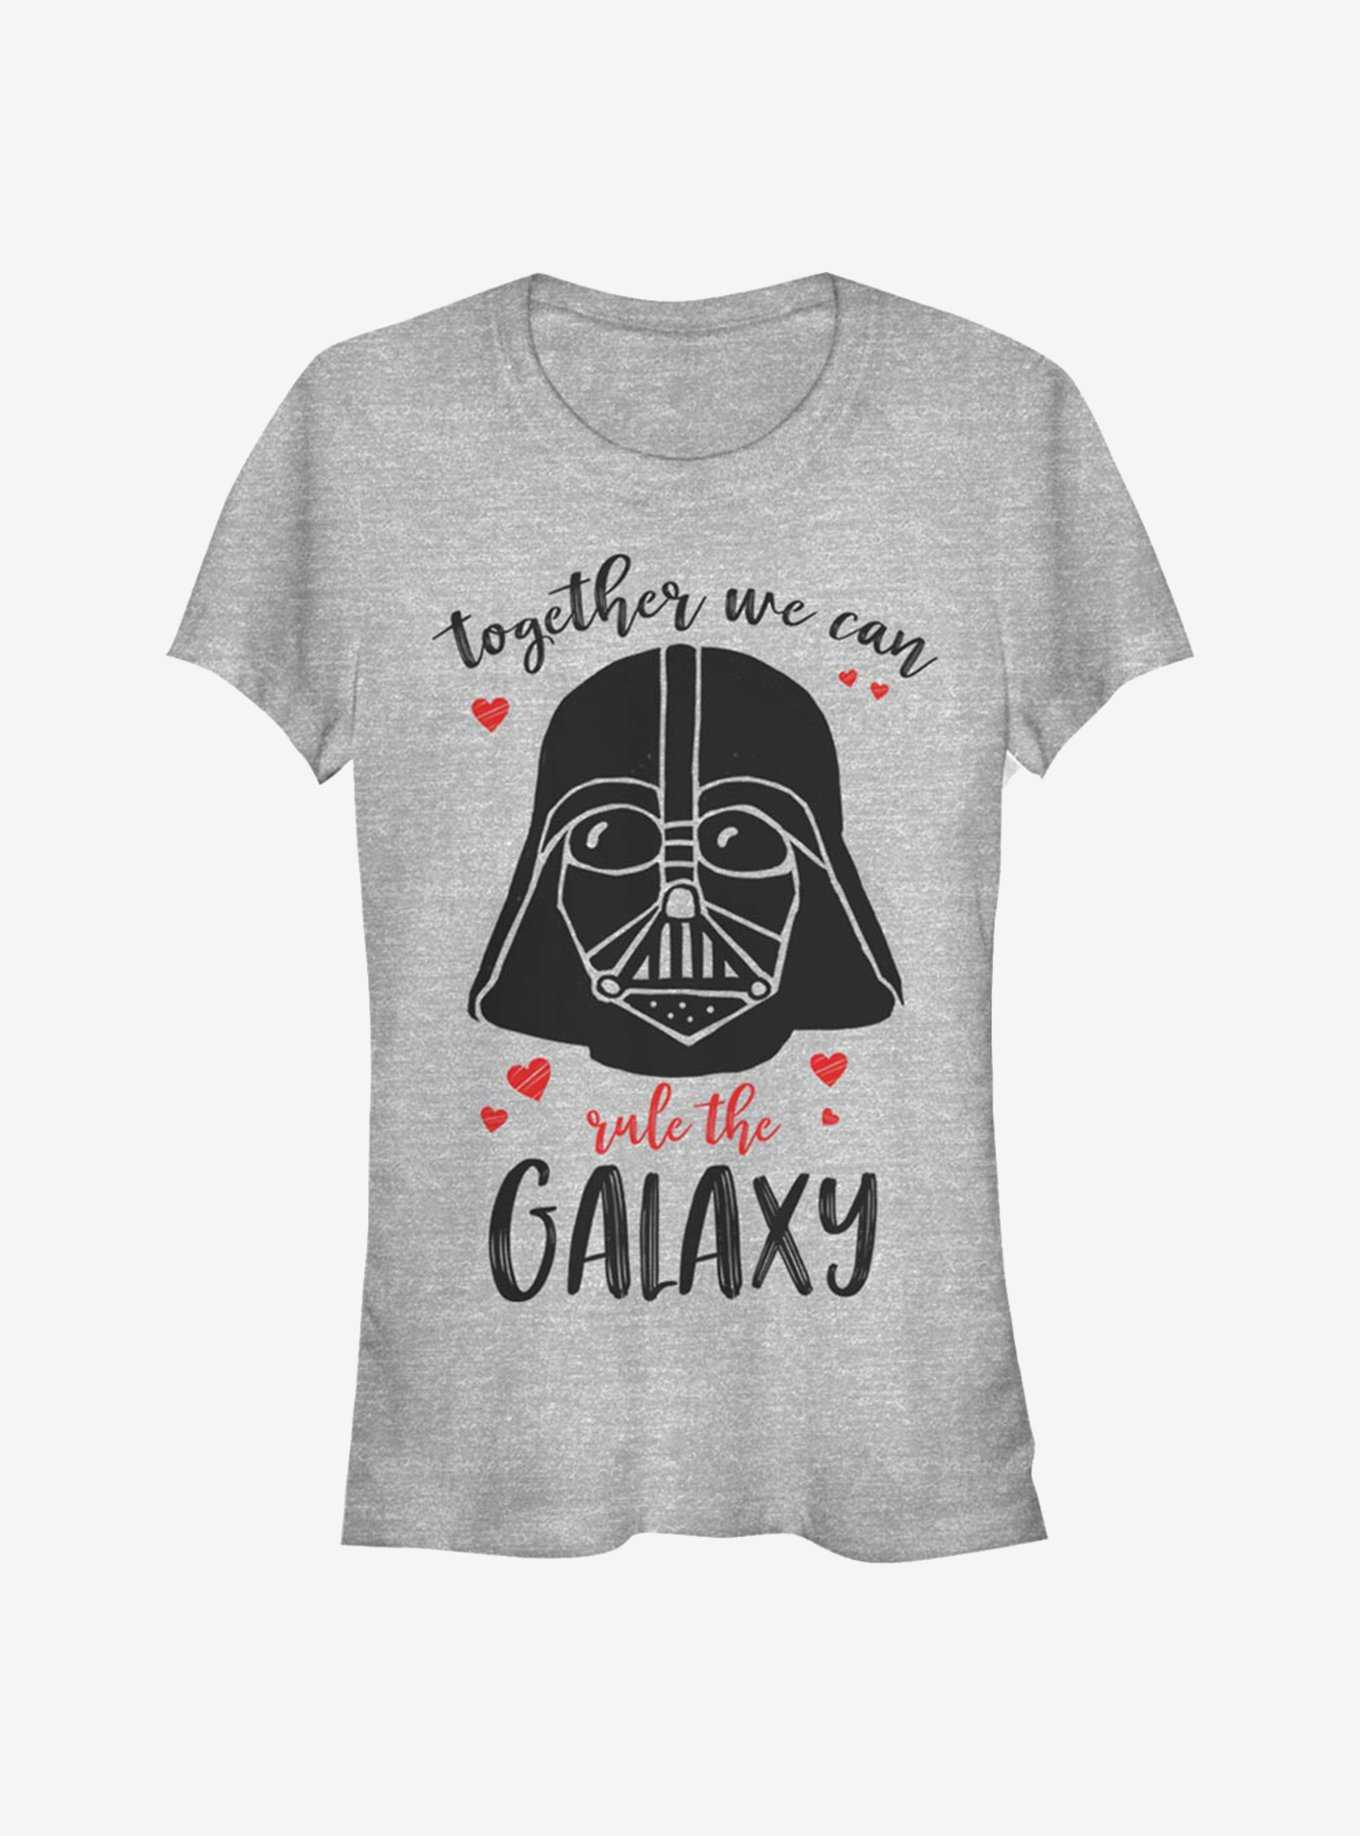 Star Wars Rulers Of The Galaxy Girls T-Shirt, , hi-res